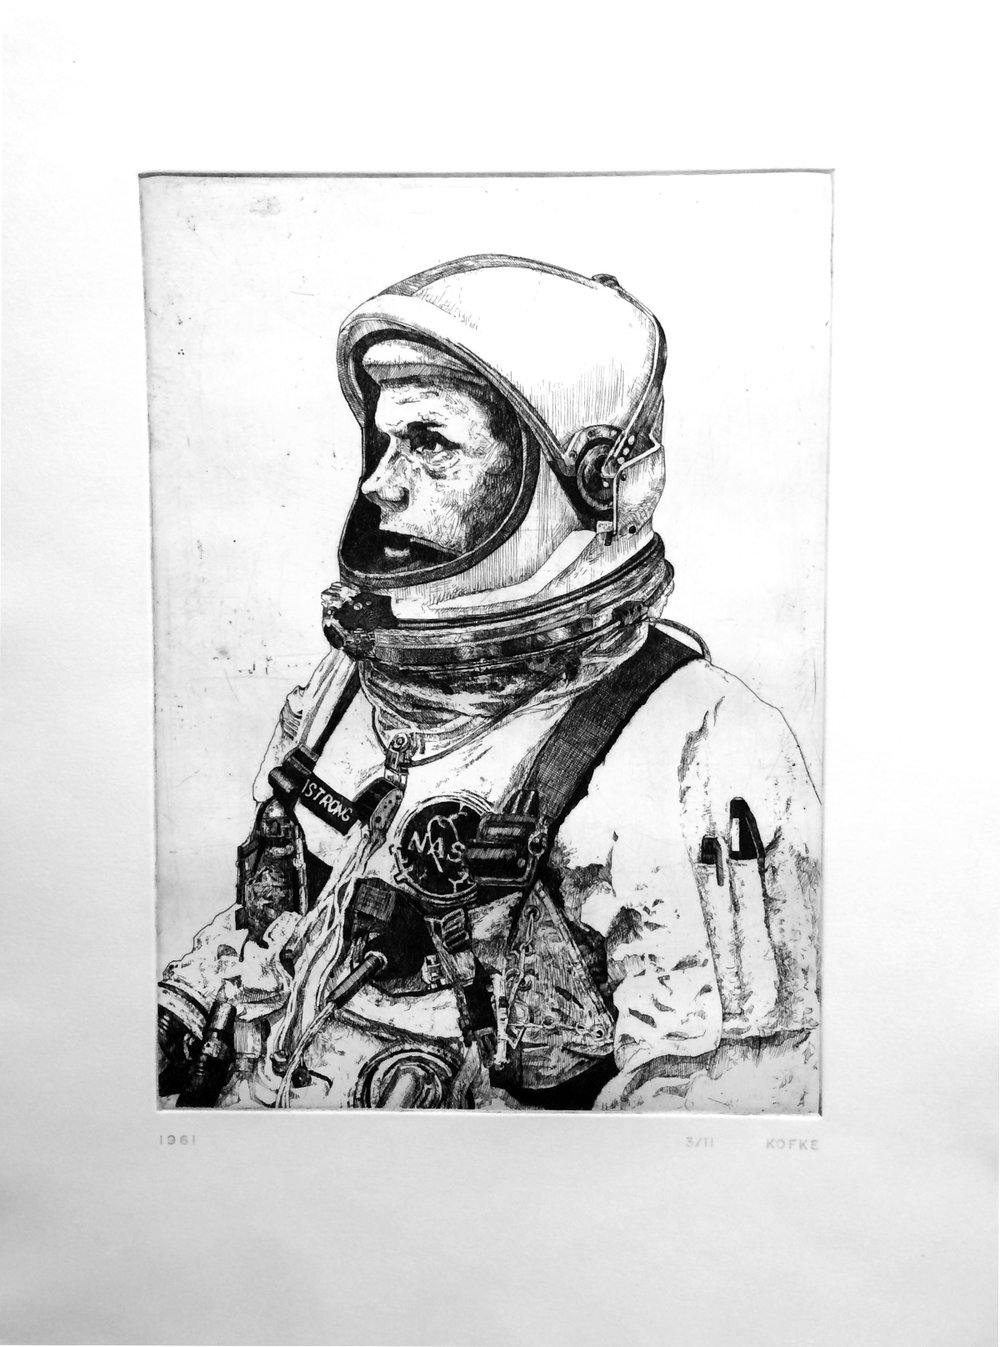 1961-etching-edition-of-11-22-x-16-inches-JKO-056G.jpg